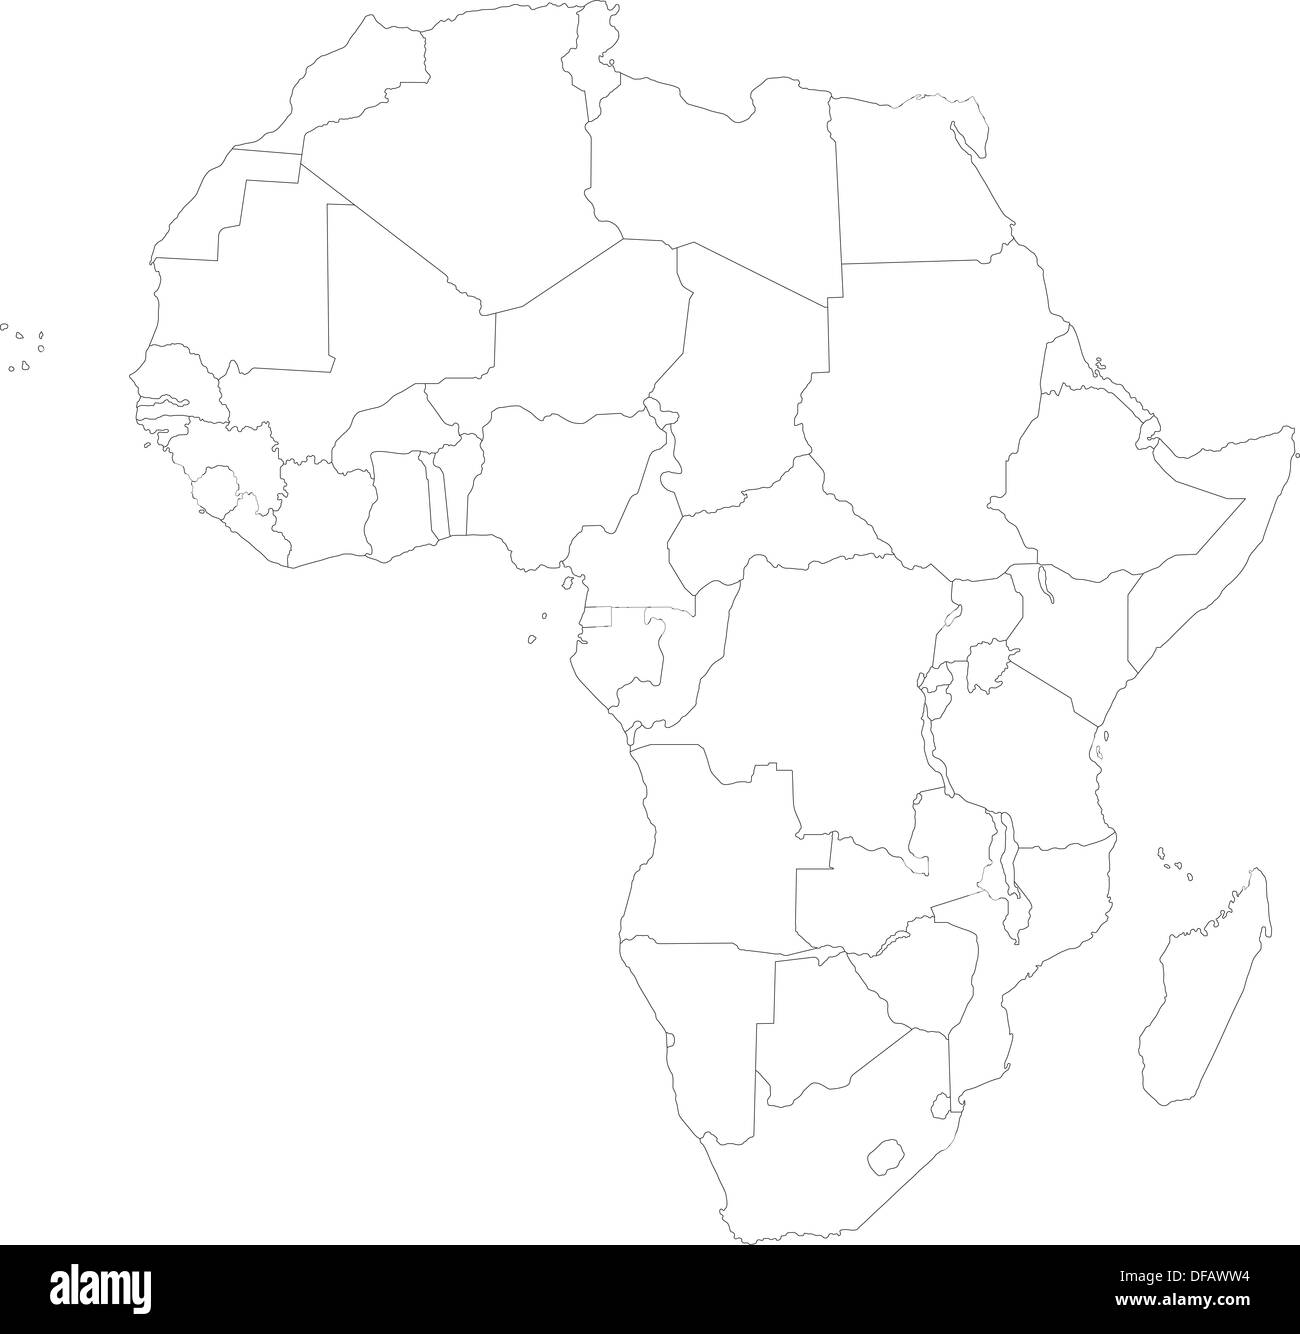 Outline Africa map Stock Photo